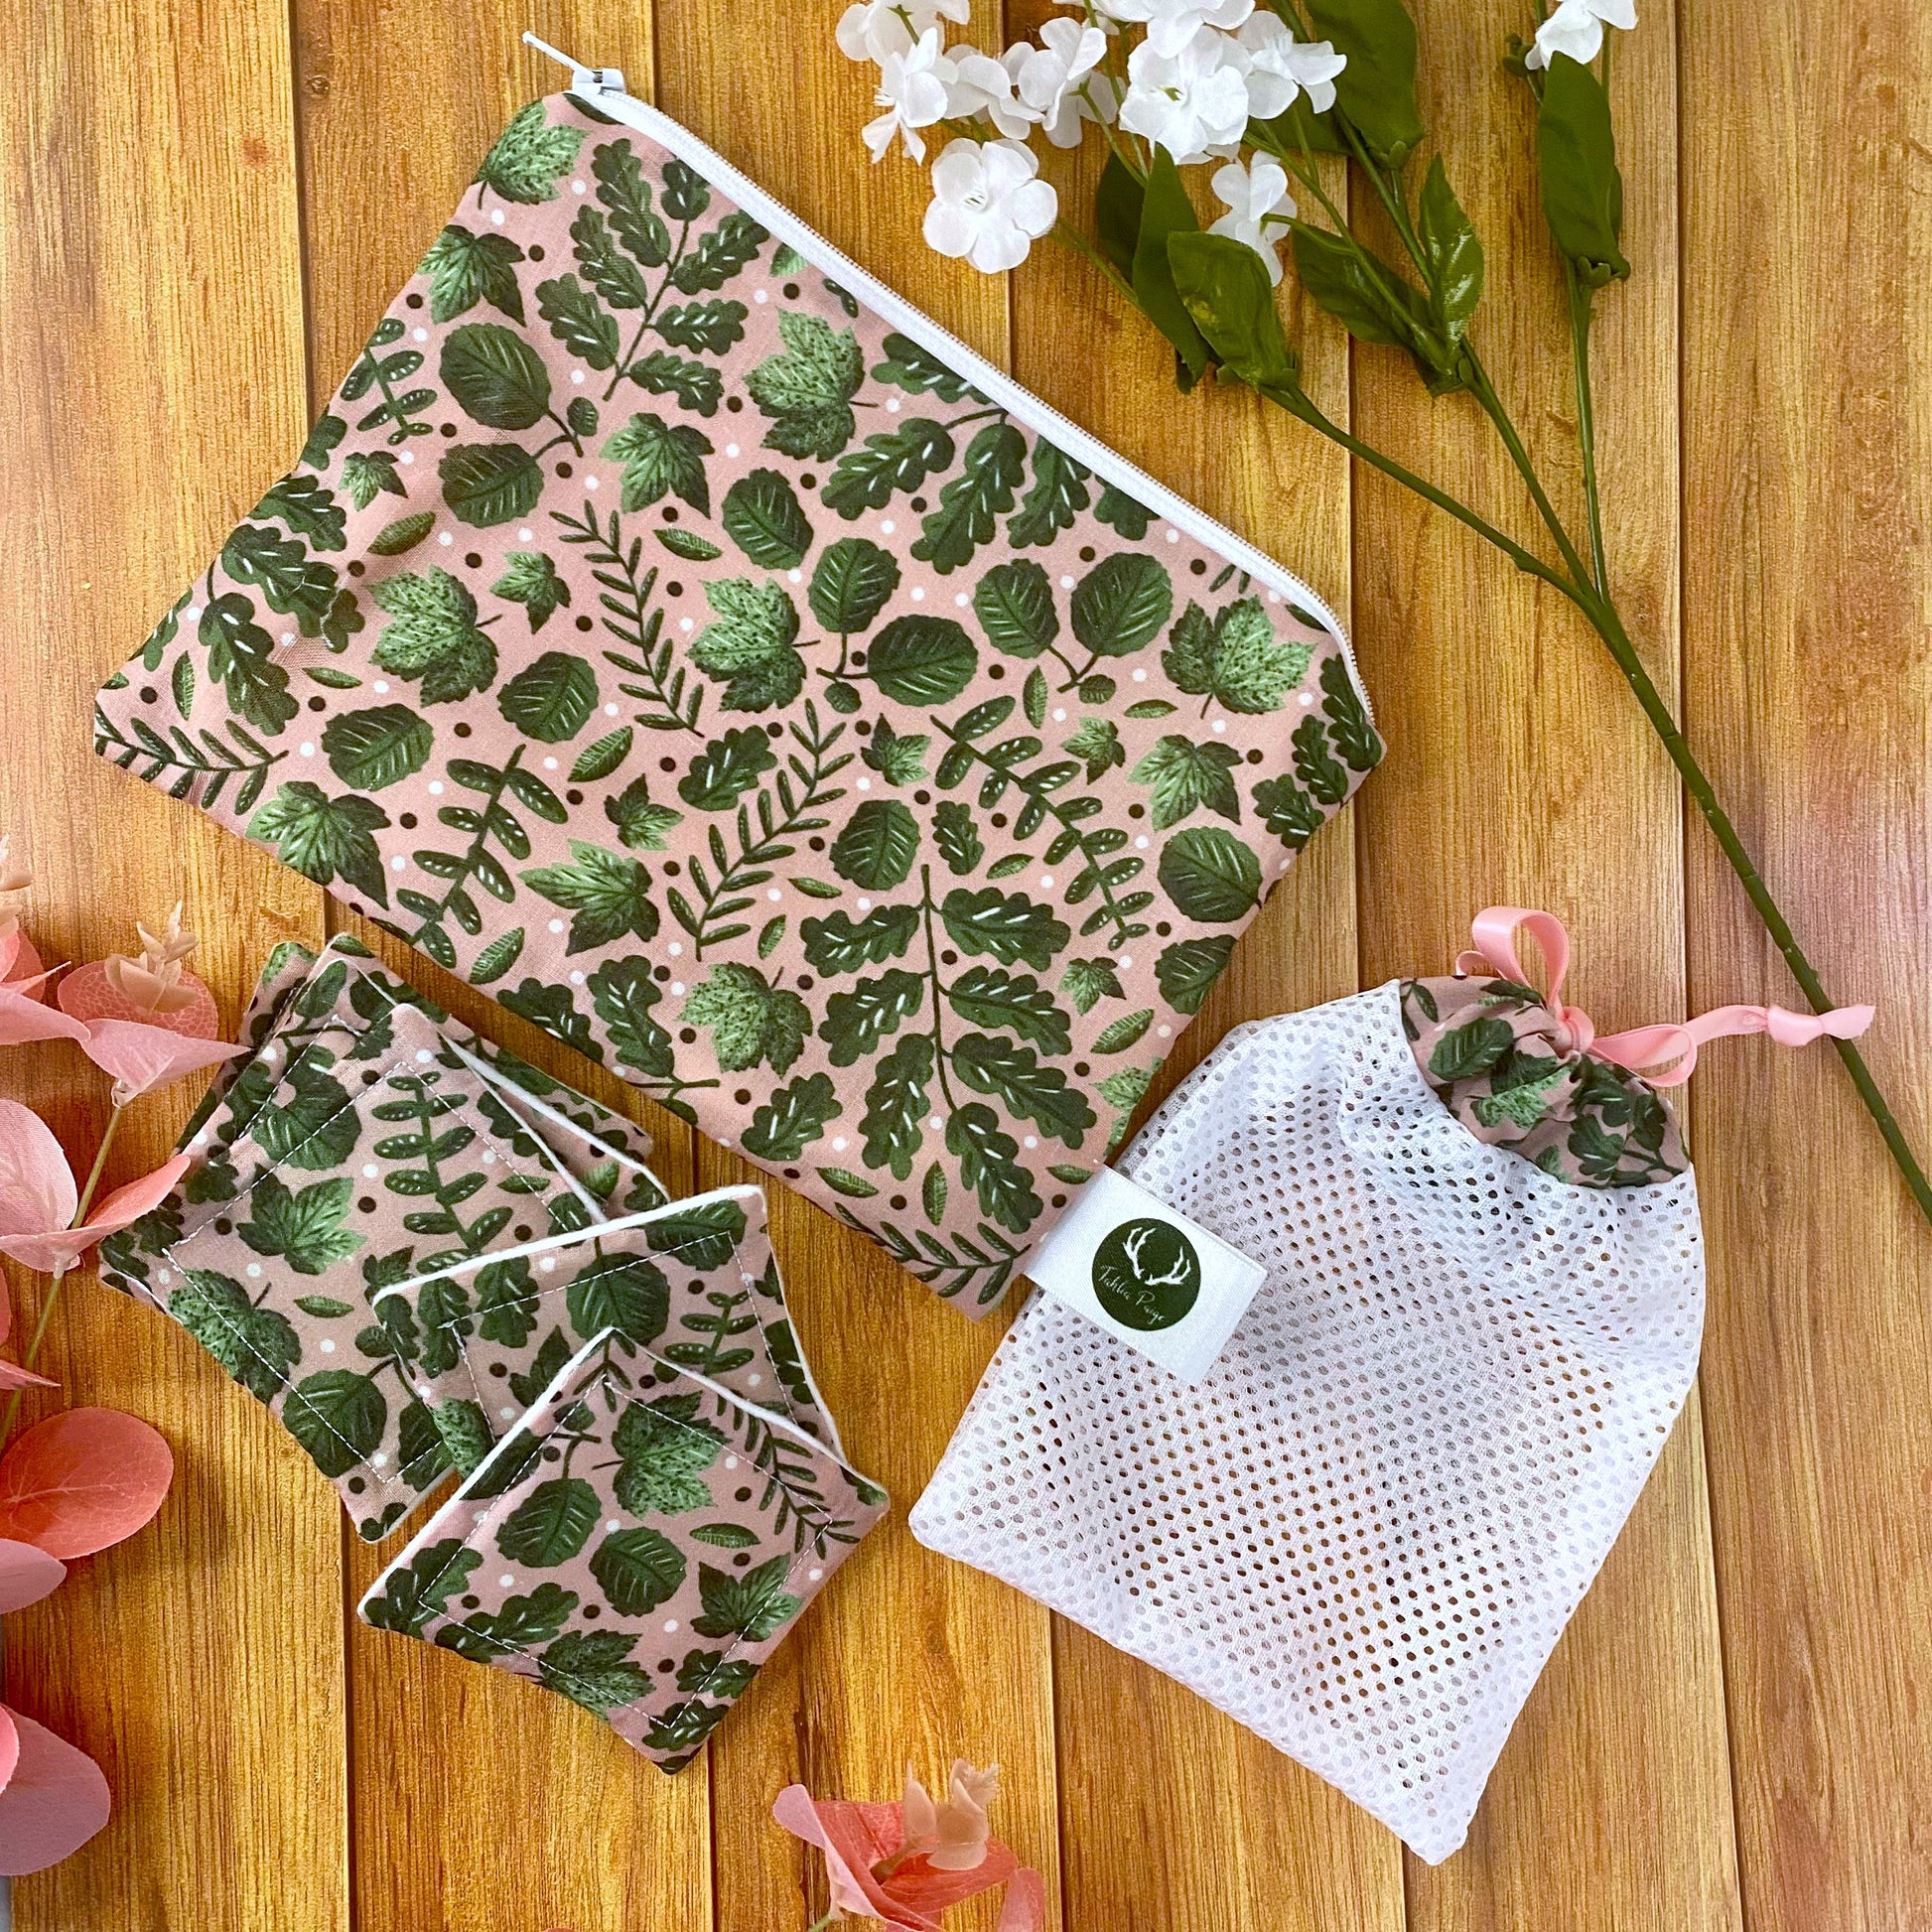 green foliage patterned pouch, reusable skincare pads and washbag all matching, on a wooden backdrop with flowers around them